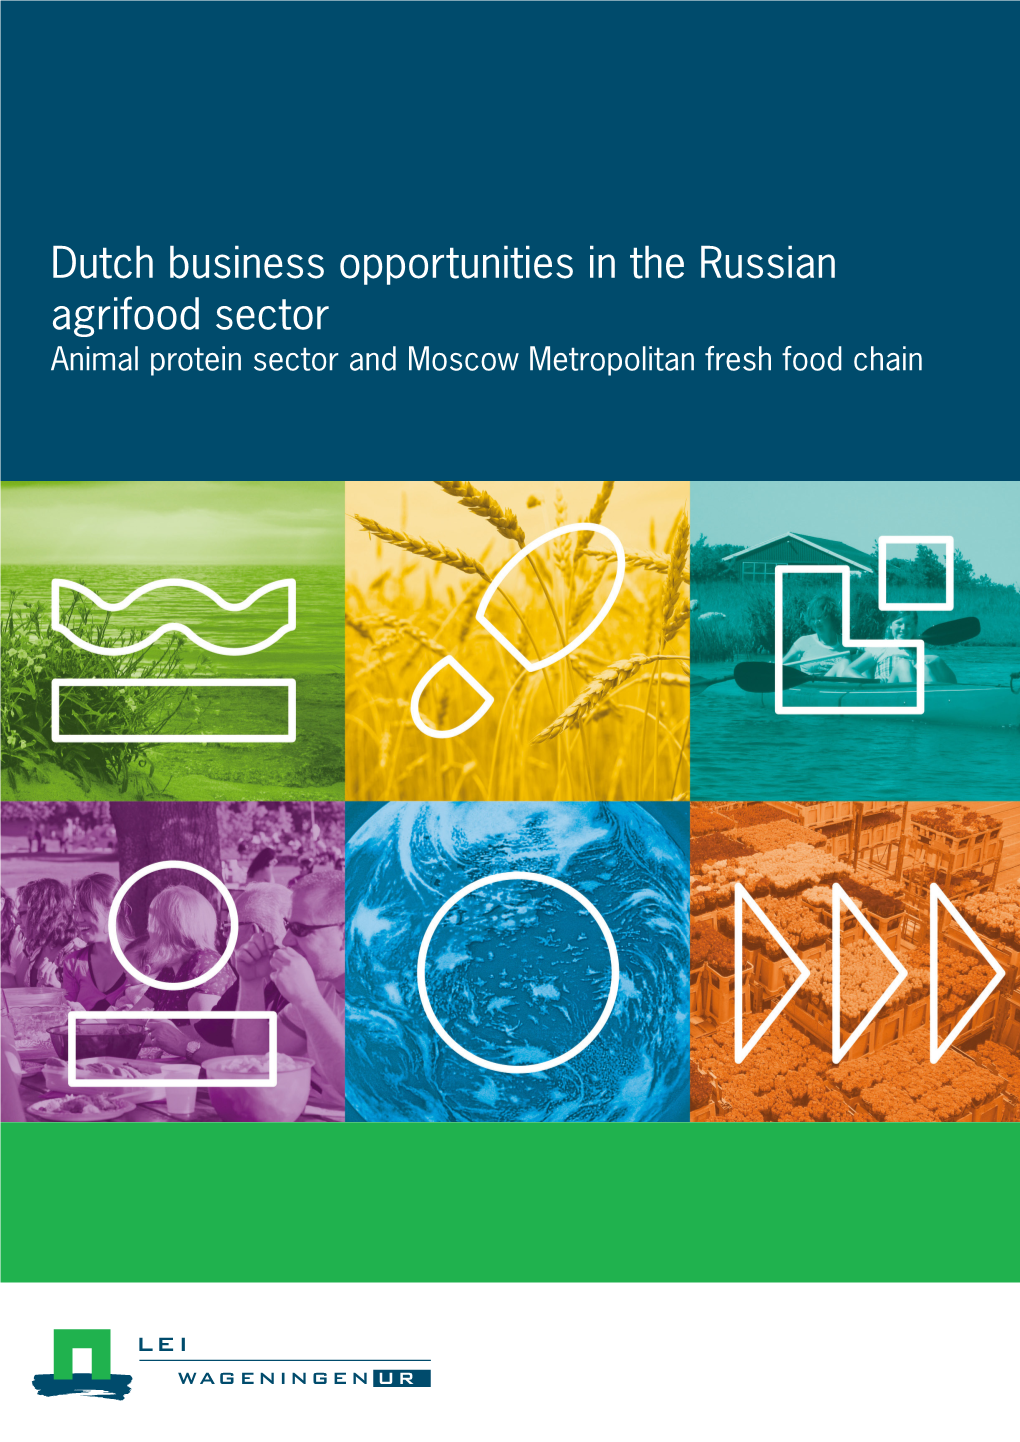 13-018 Dutch Business Opportunities in the Russian Agrifood Sector